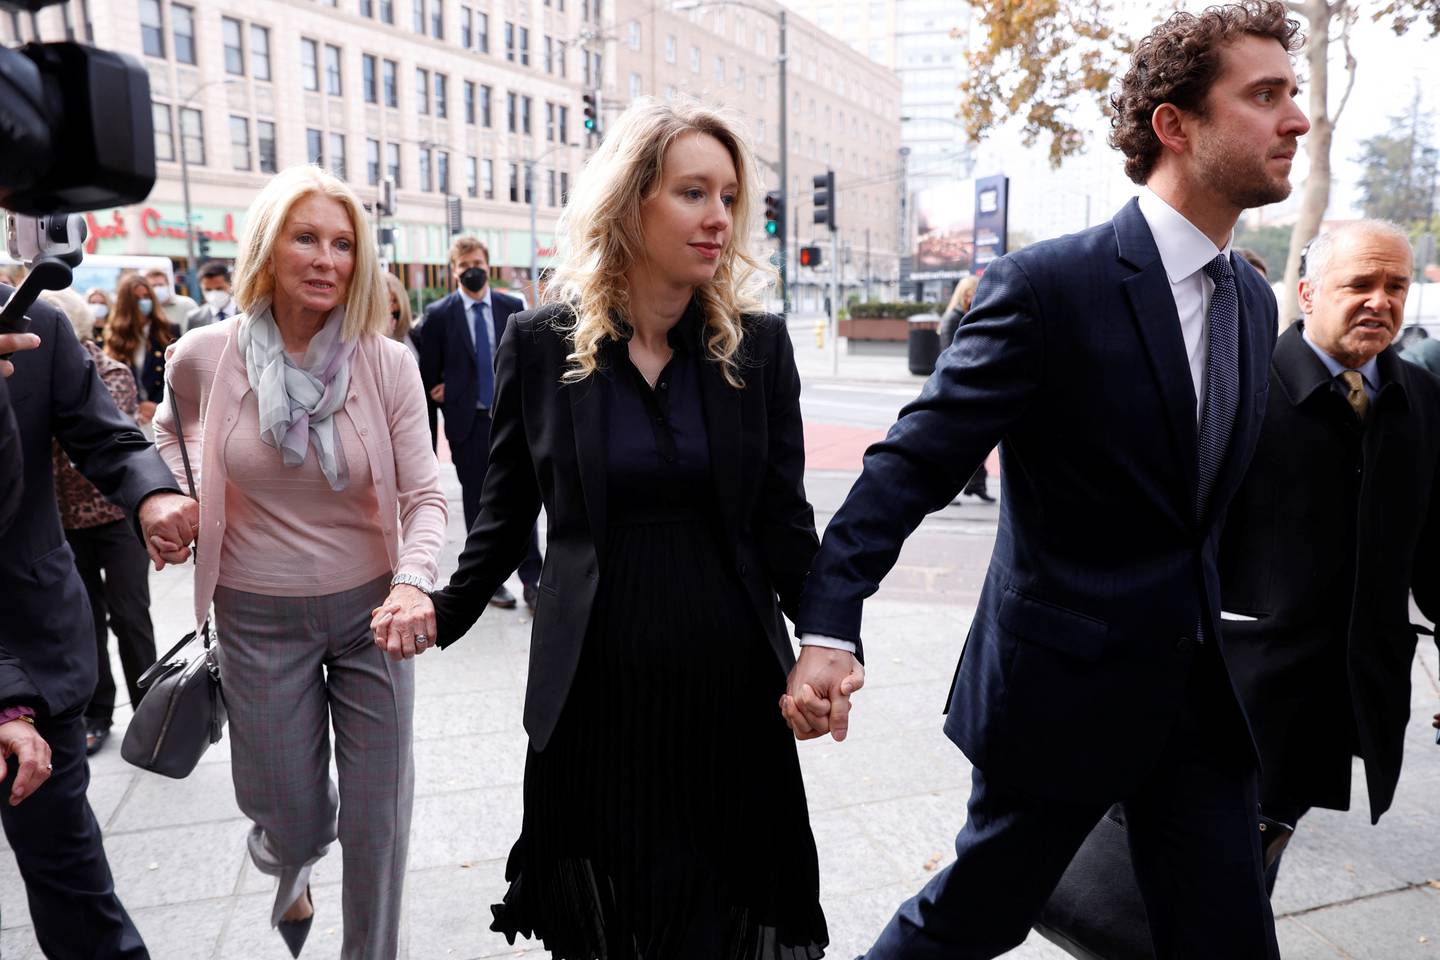 Theranos founder Elizabeth Holmes arrives with her family and partner Billy Evans to be sentenced on her convictions for defrauding investors. Reuters